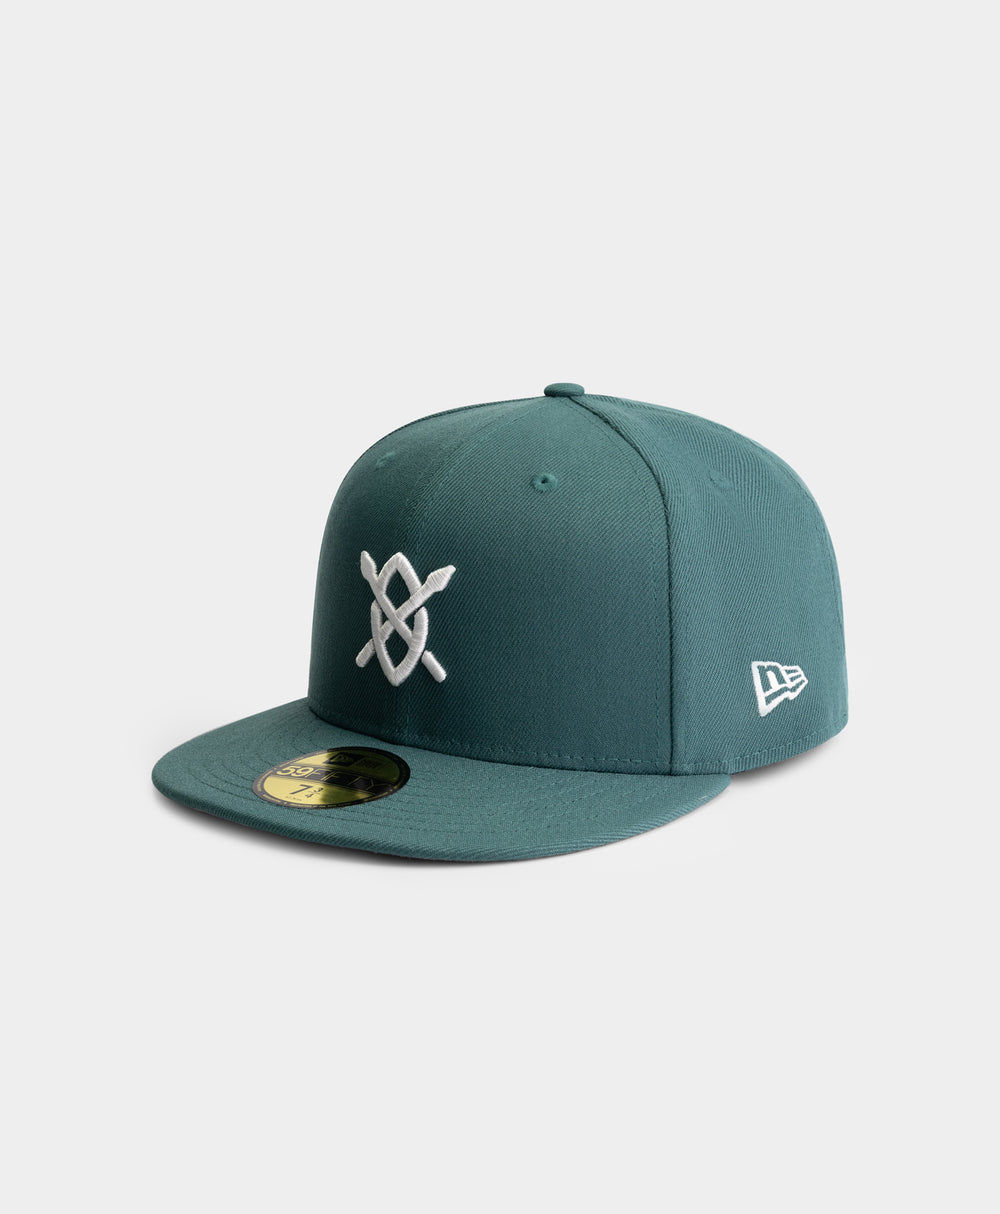 DP - Pine Green Daily Paper x New Era 59FIFTY Fitted Cap - Packshot - Front